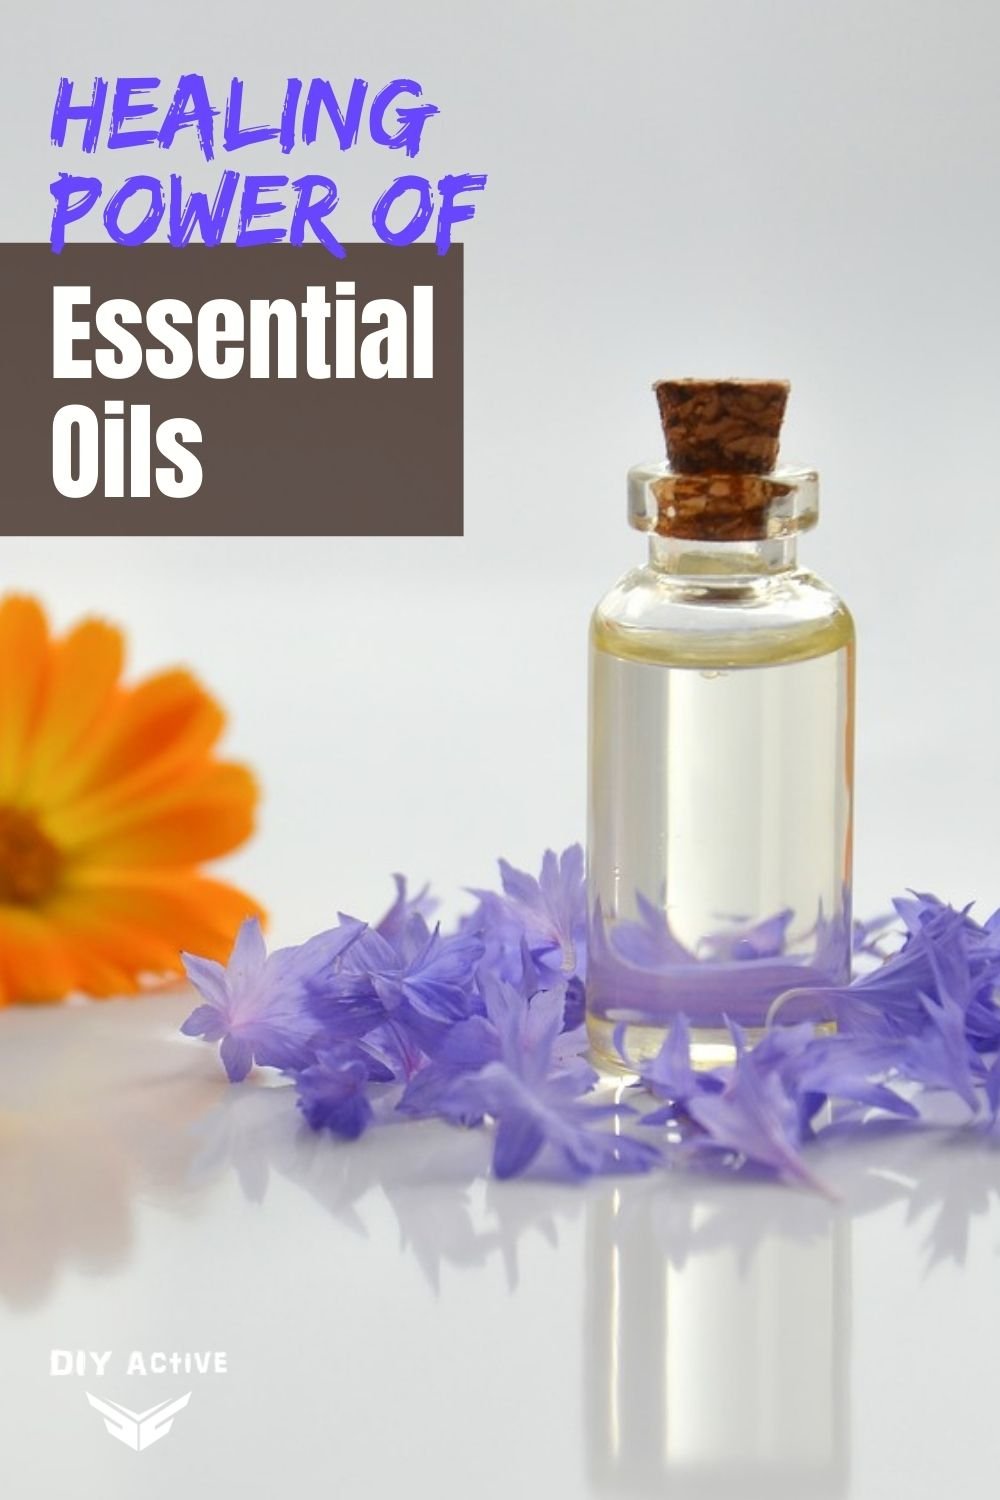 The Healing Power of Five Aromatherapy Essential Oils